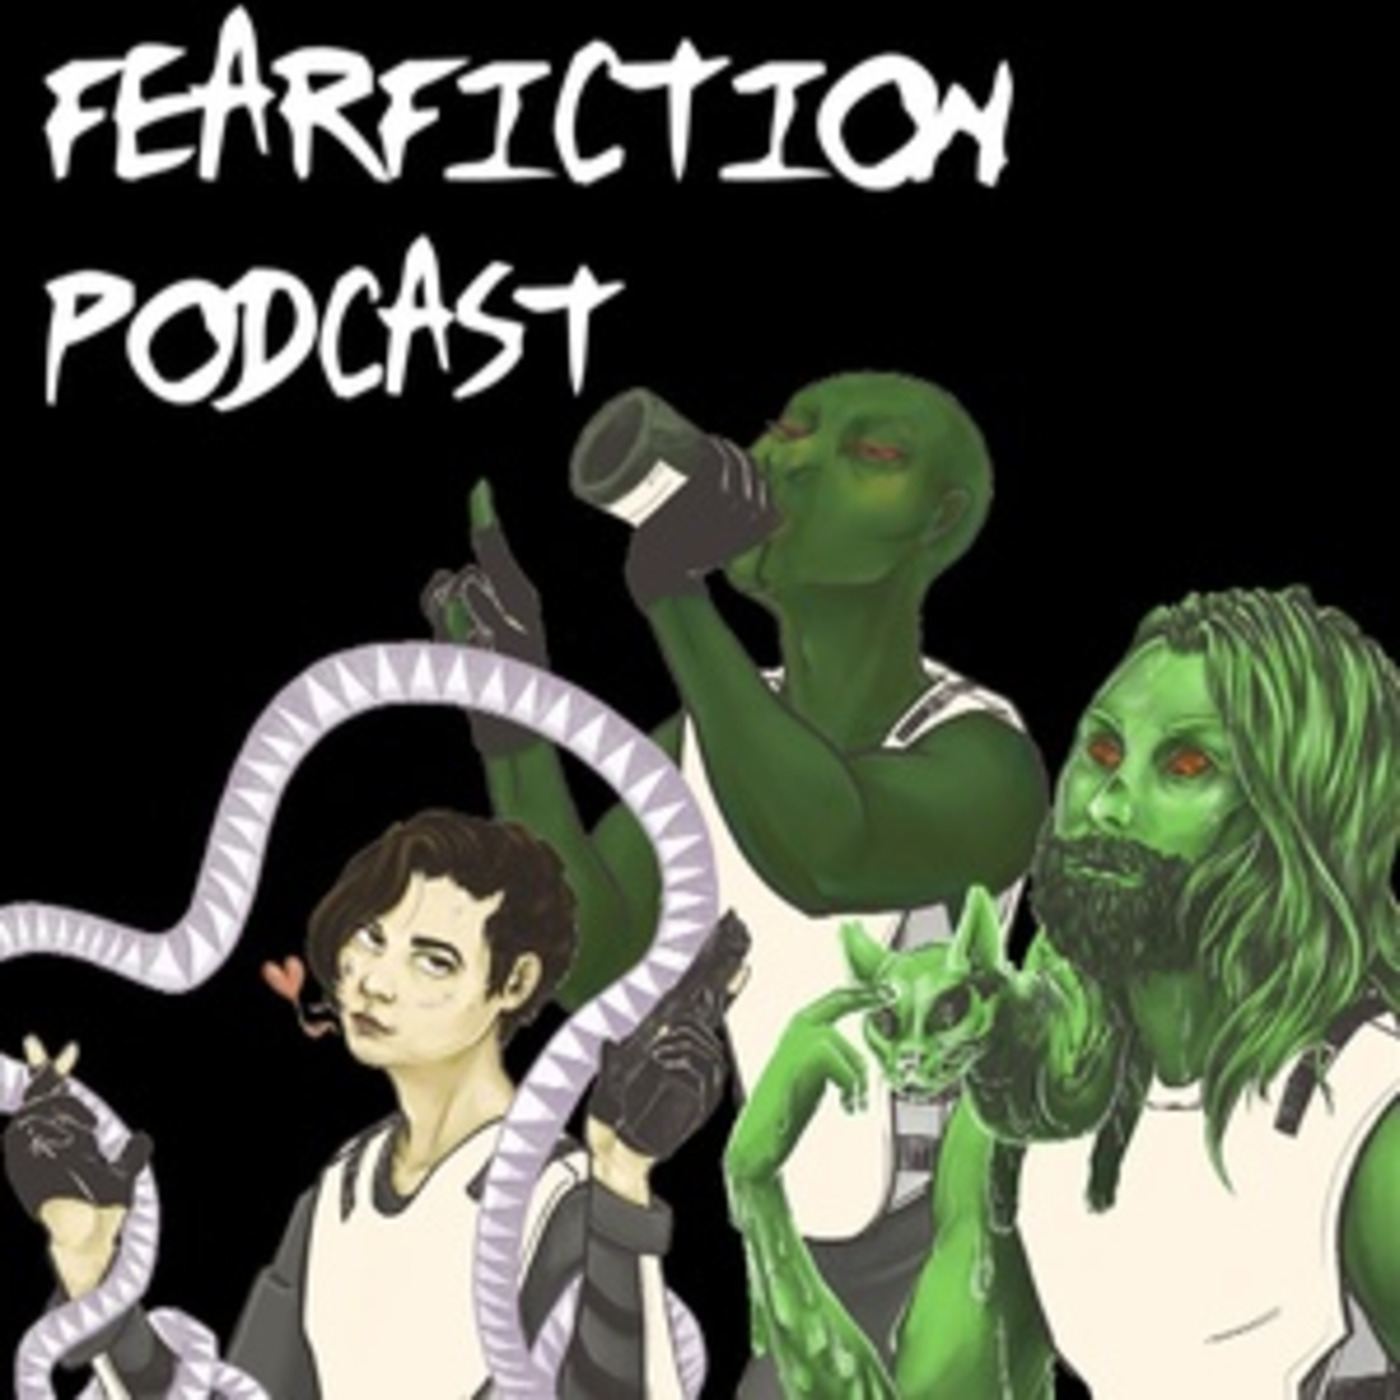 Episode 14: Attack of the Flesh Bots from Saturn